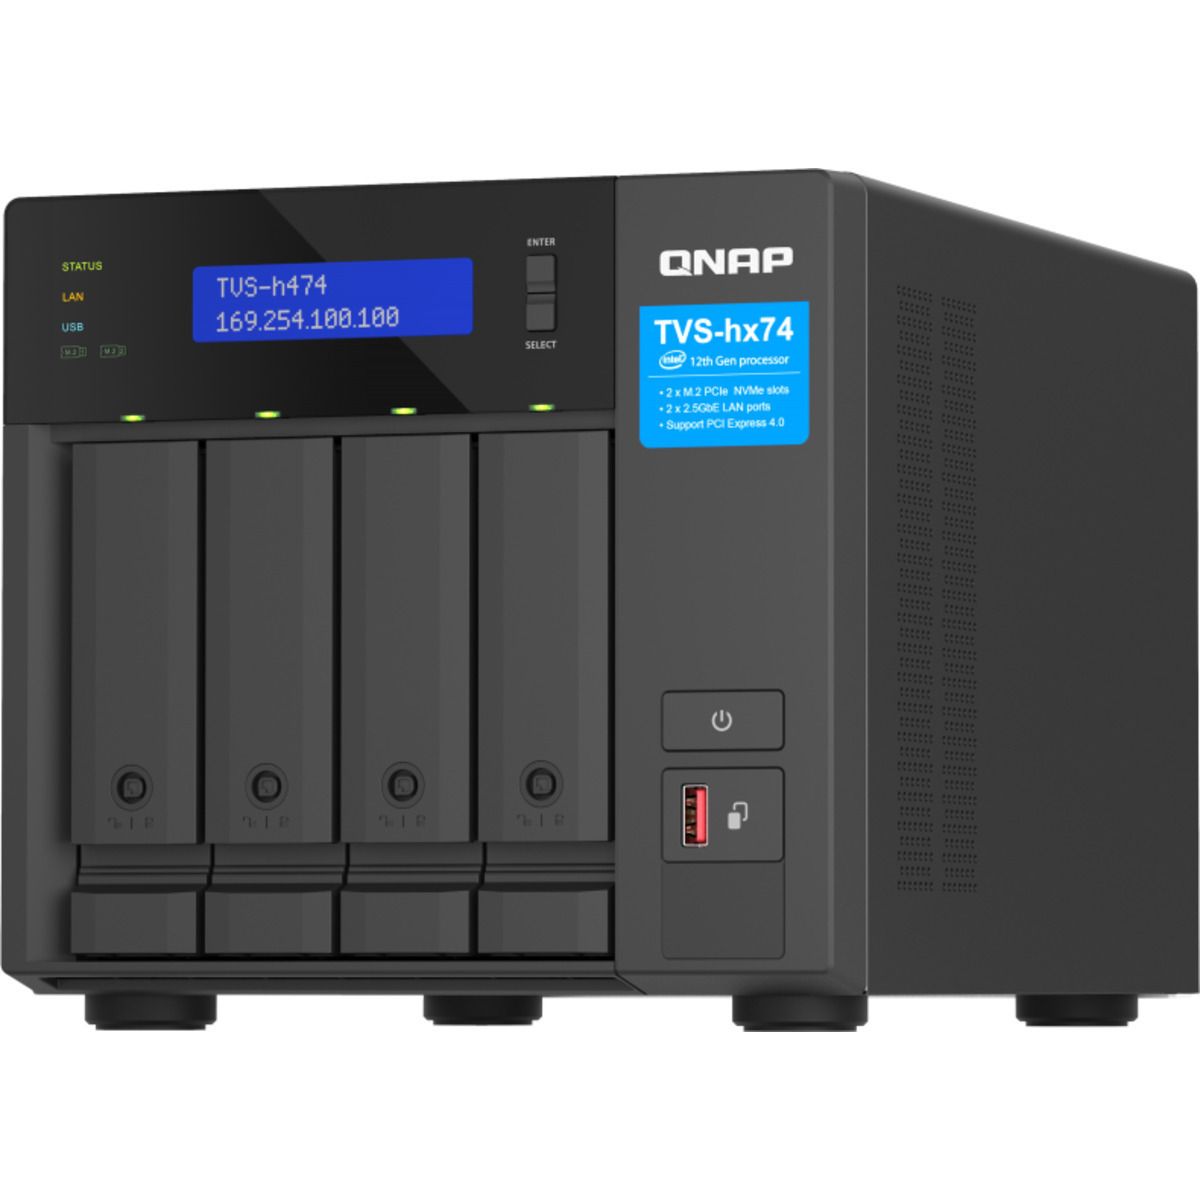 QNAP TVS-h474 Pentium Gold 16tb 4-Bay Desktop Multimedia / Power User / Business NAS - Network Attached Storage Device 2x8tb Seagate EXOS 7E10 ST8000NM017B 3.5 7200rpm SATA 6Gb/s HDD ENTERPRISE Class Drives Installed - Burn-In Tested - FREE RAM UPGRADE TVS-h474 Pentium Gold